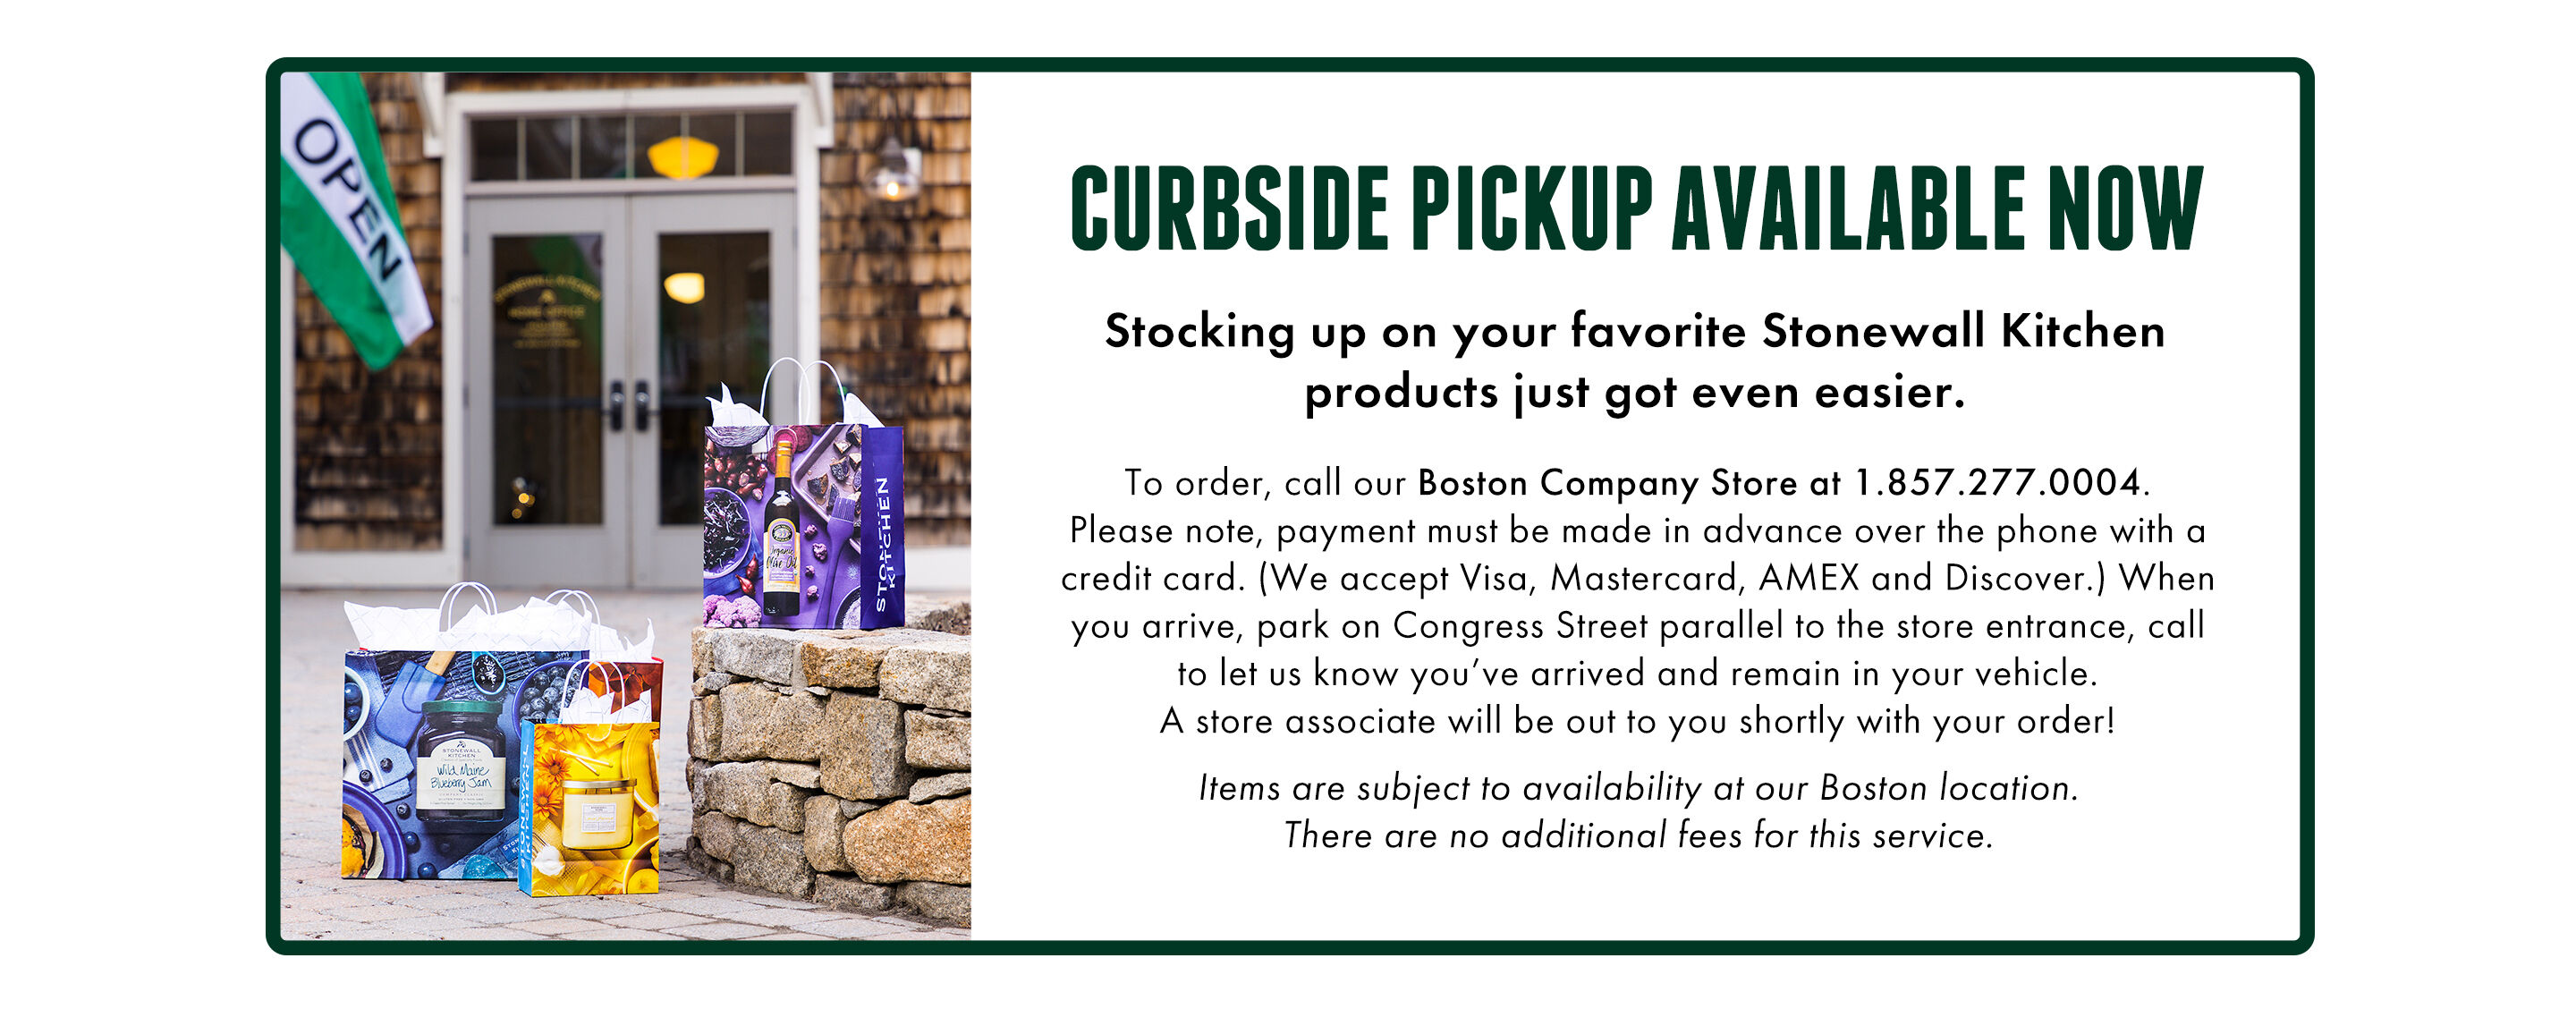 Curbside Pickup Available Now